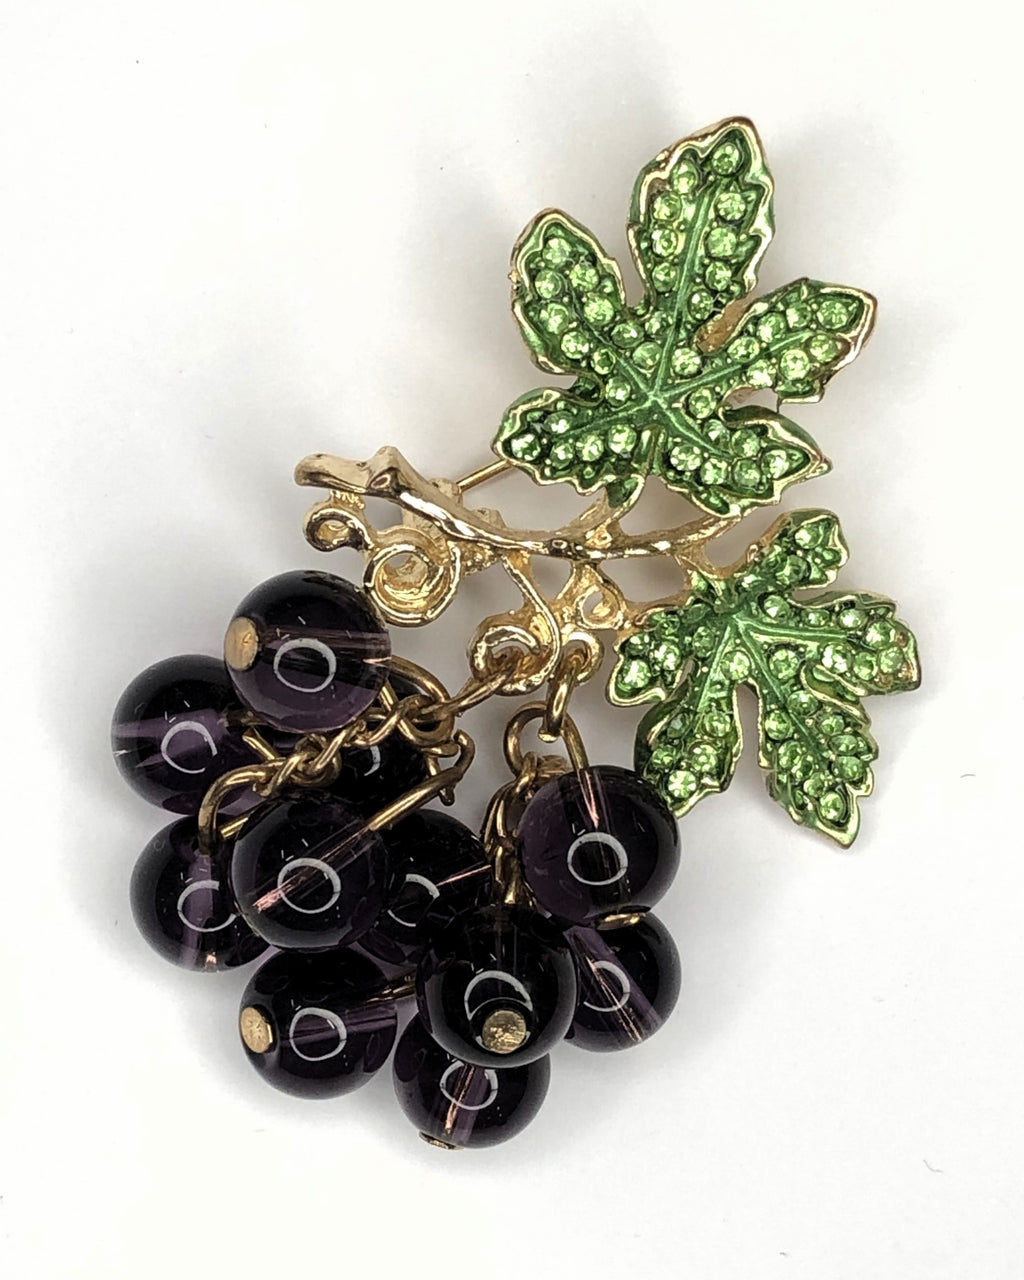 Purple glass bunch of grapes with green diamante vine leaves brooch at erika